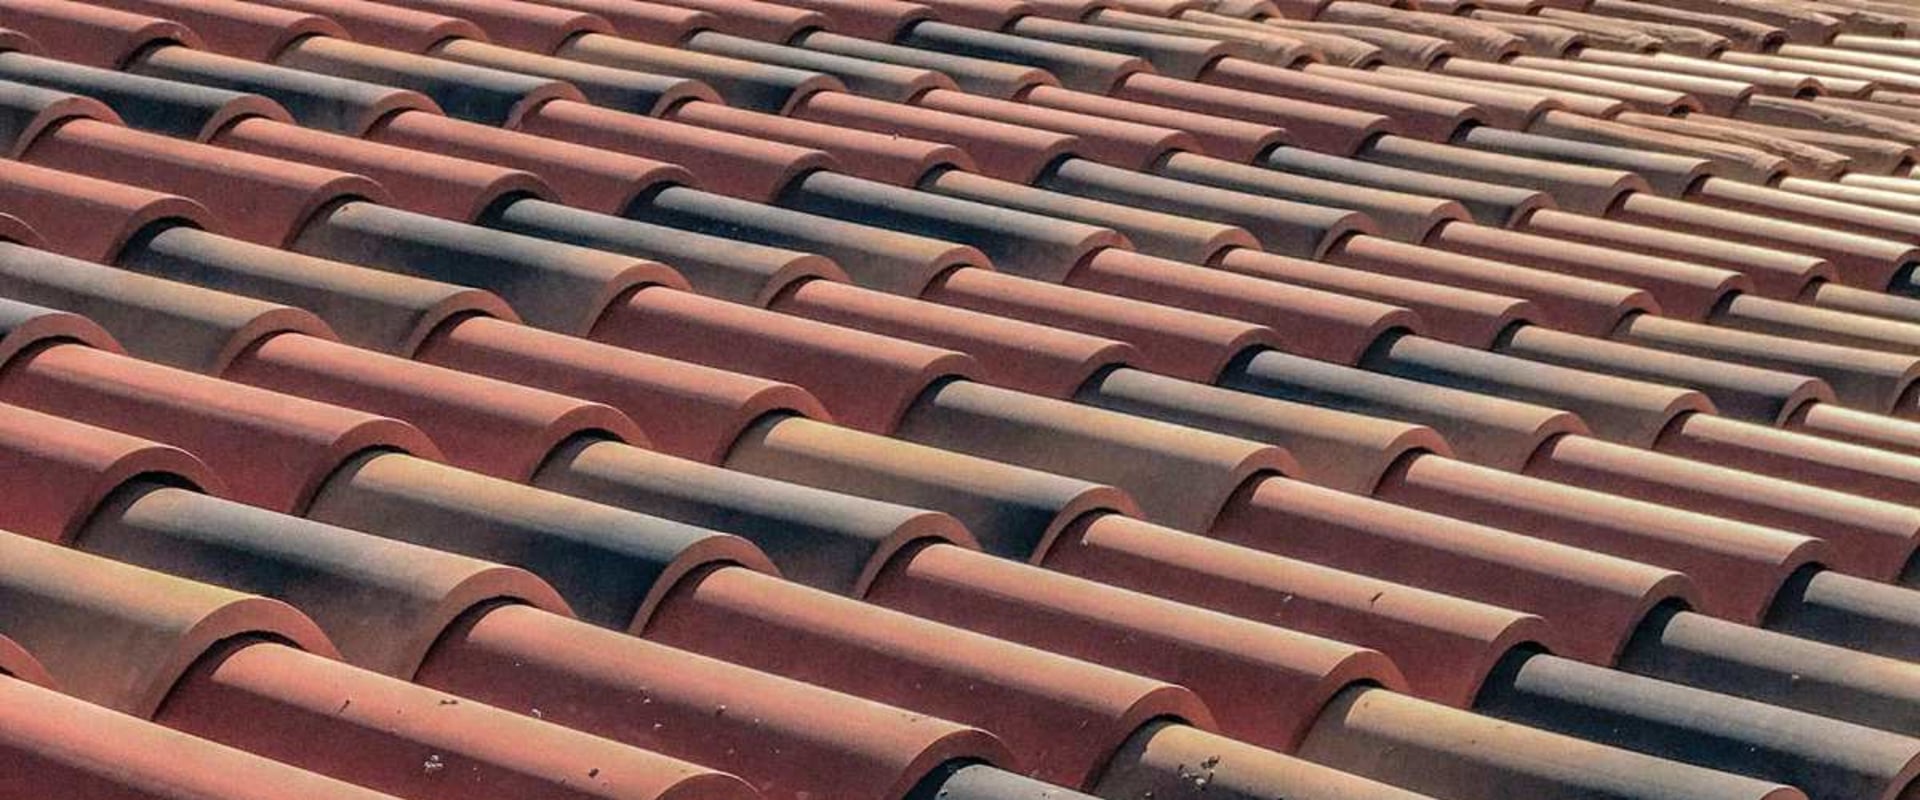 Benefits and Drawbacks of Different Roofing Materials